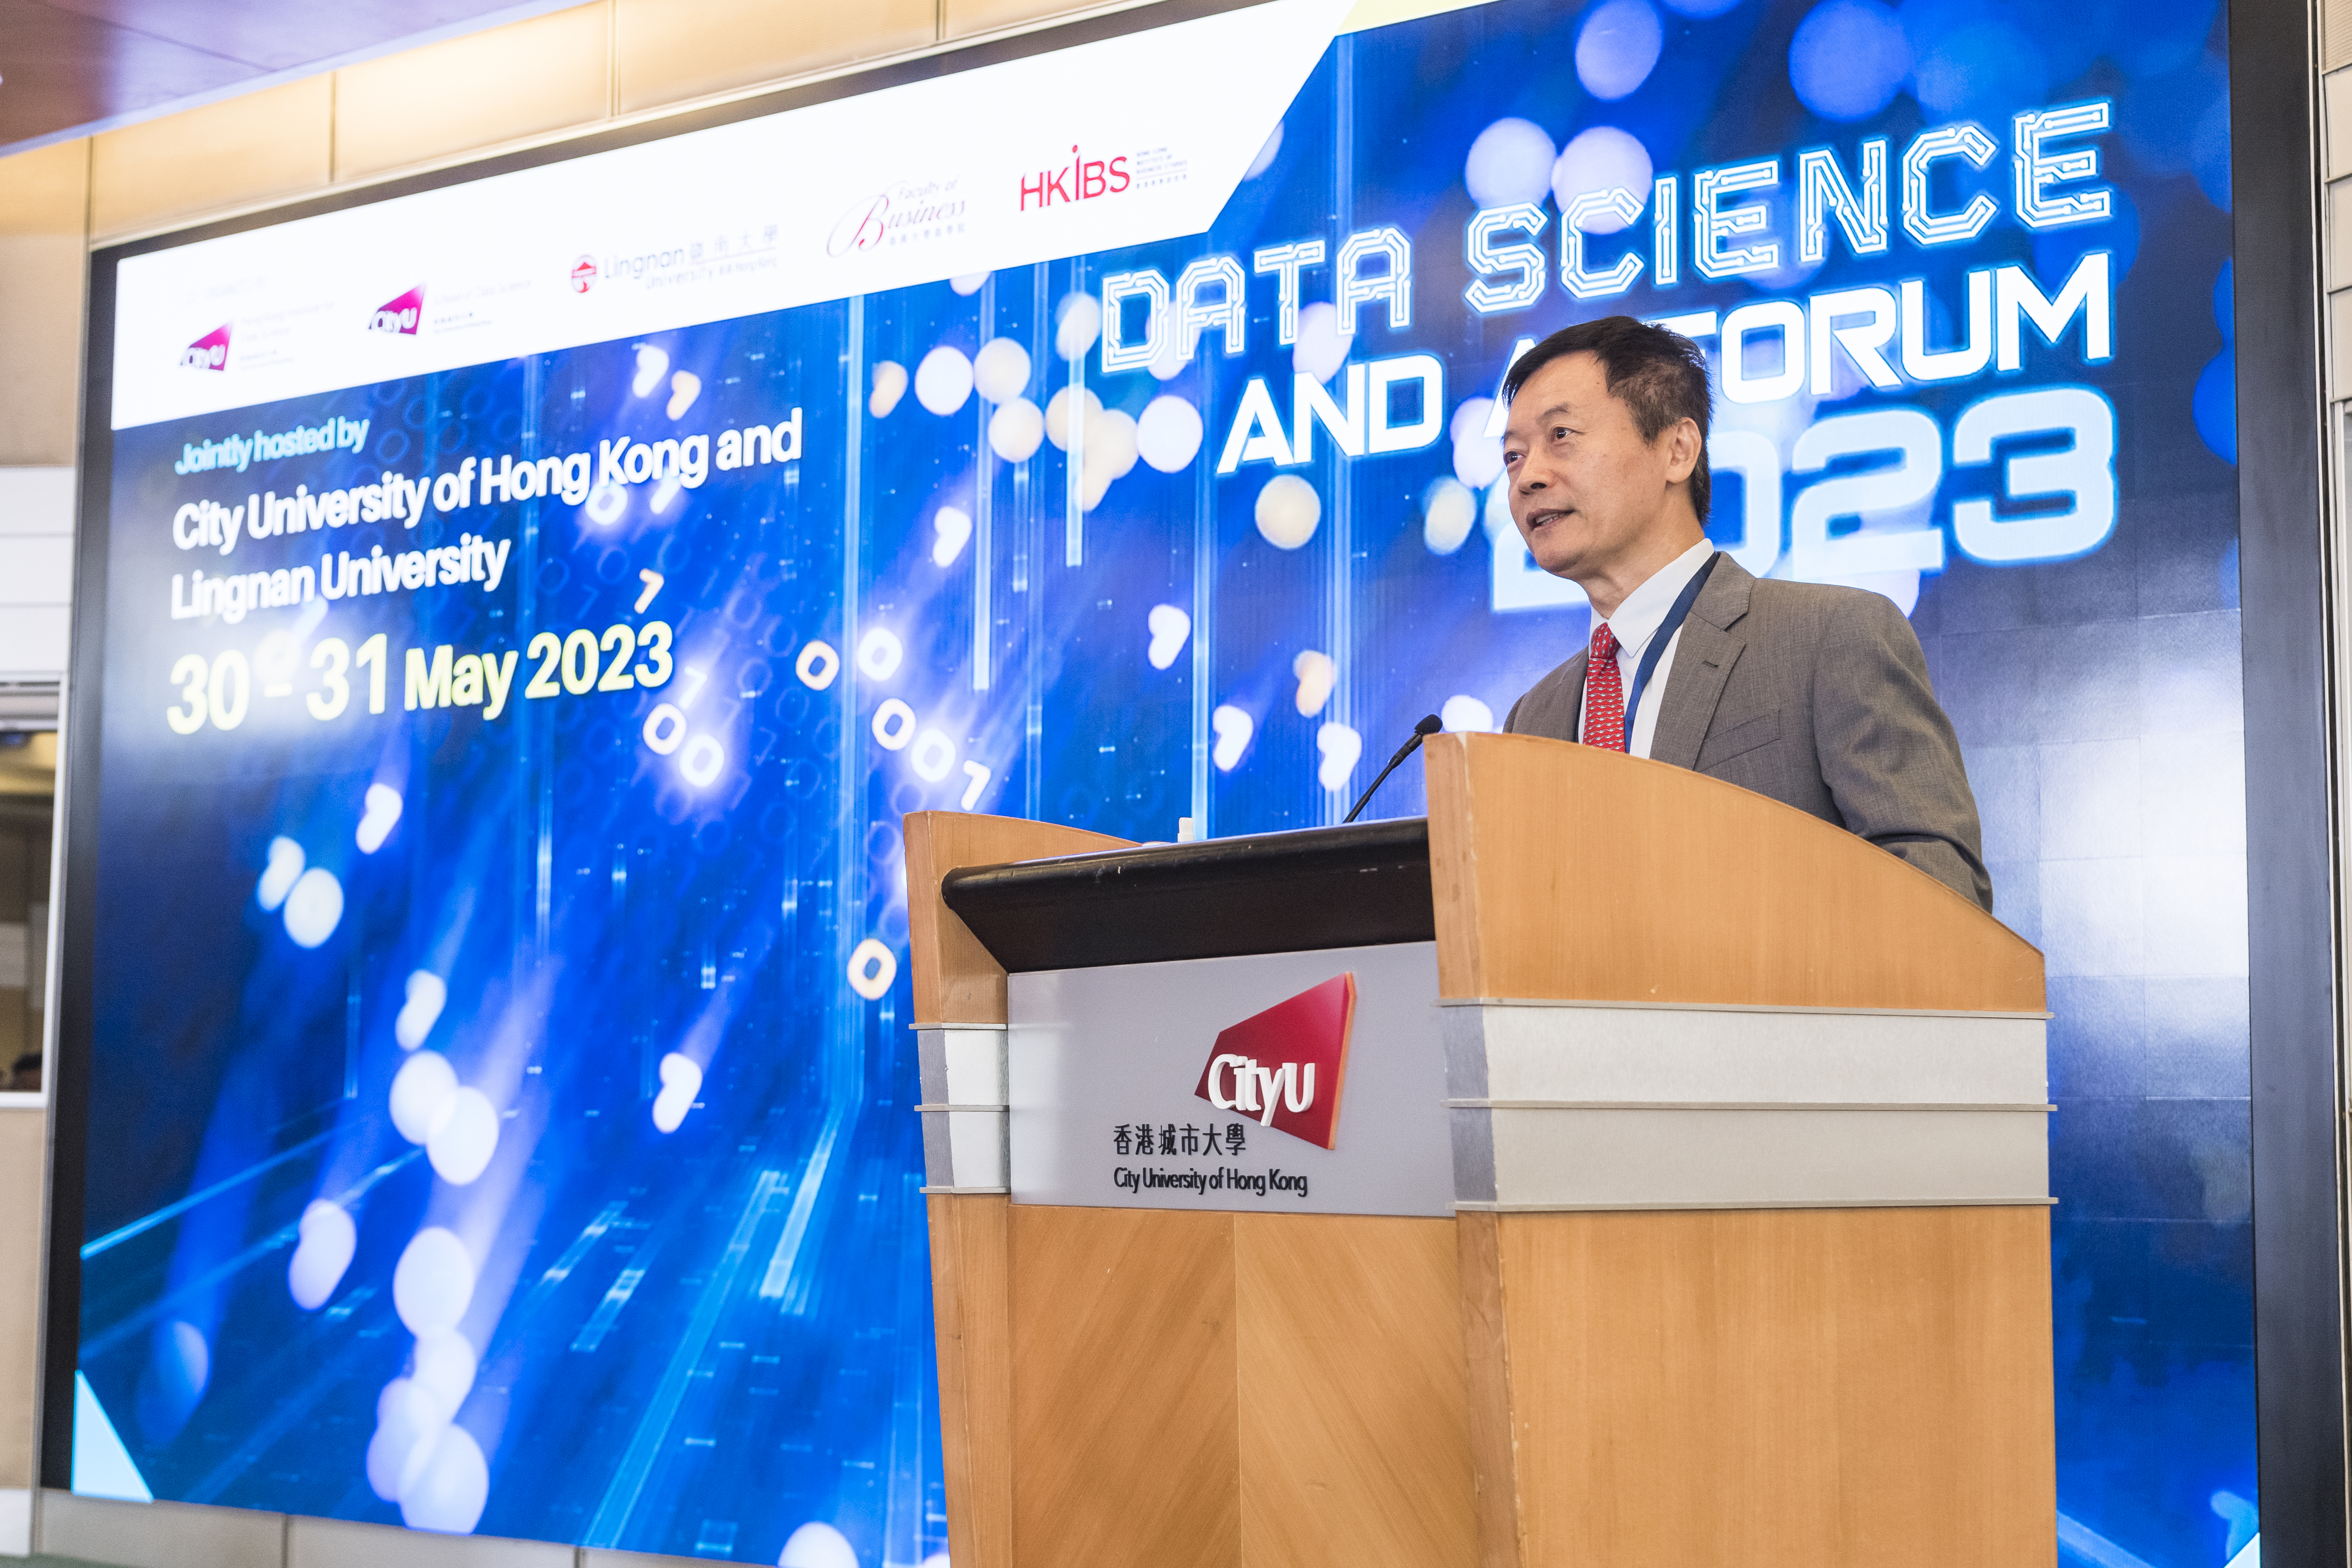 Professor Qin mentioned the pioneering success of both CityU and LU in leading data science in Hong Kong.